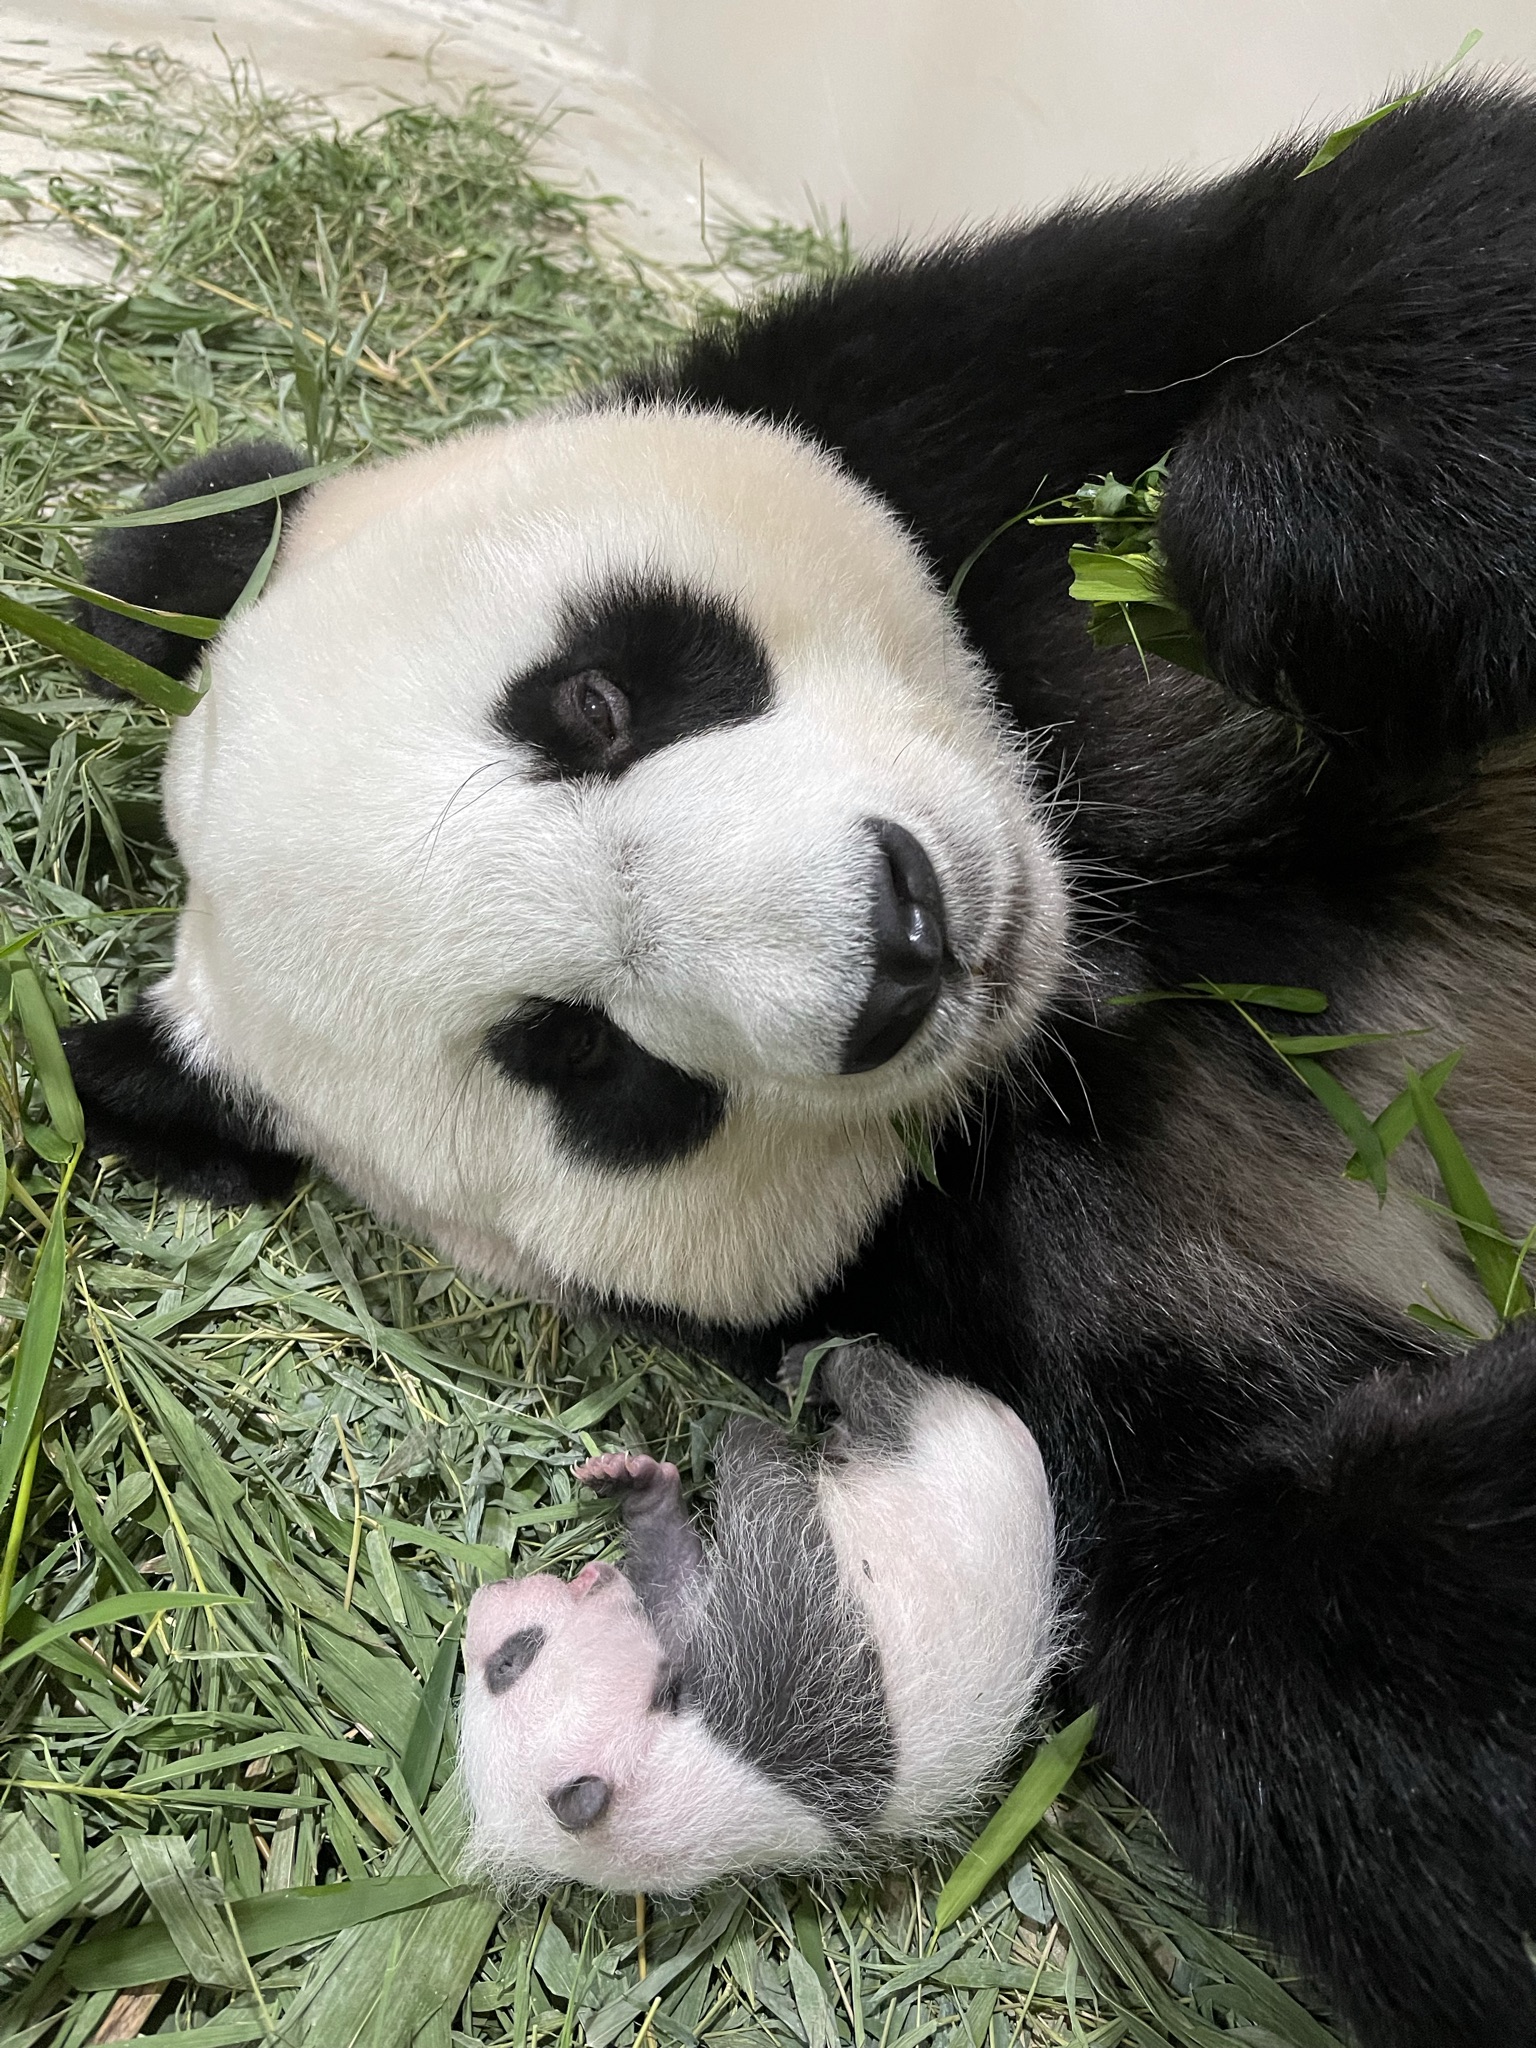 What is the gender of the baby panda Jia Jia?